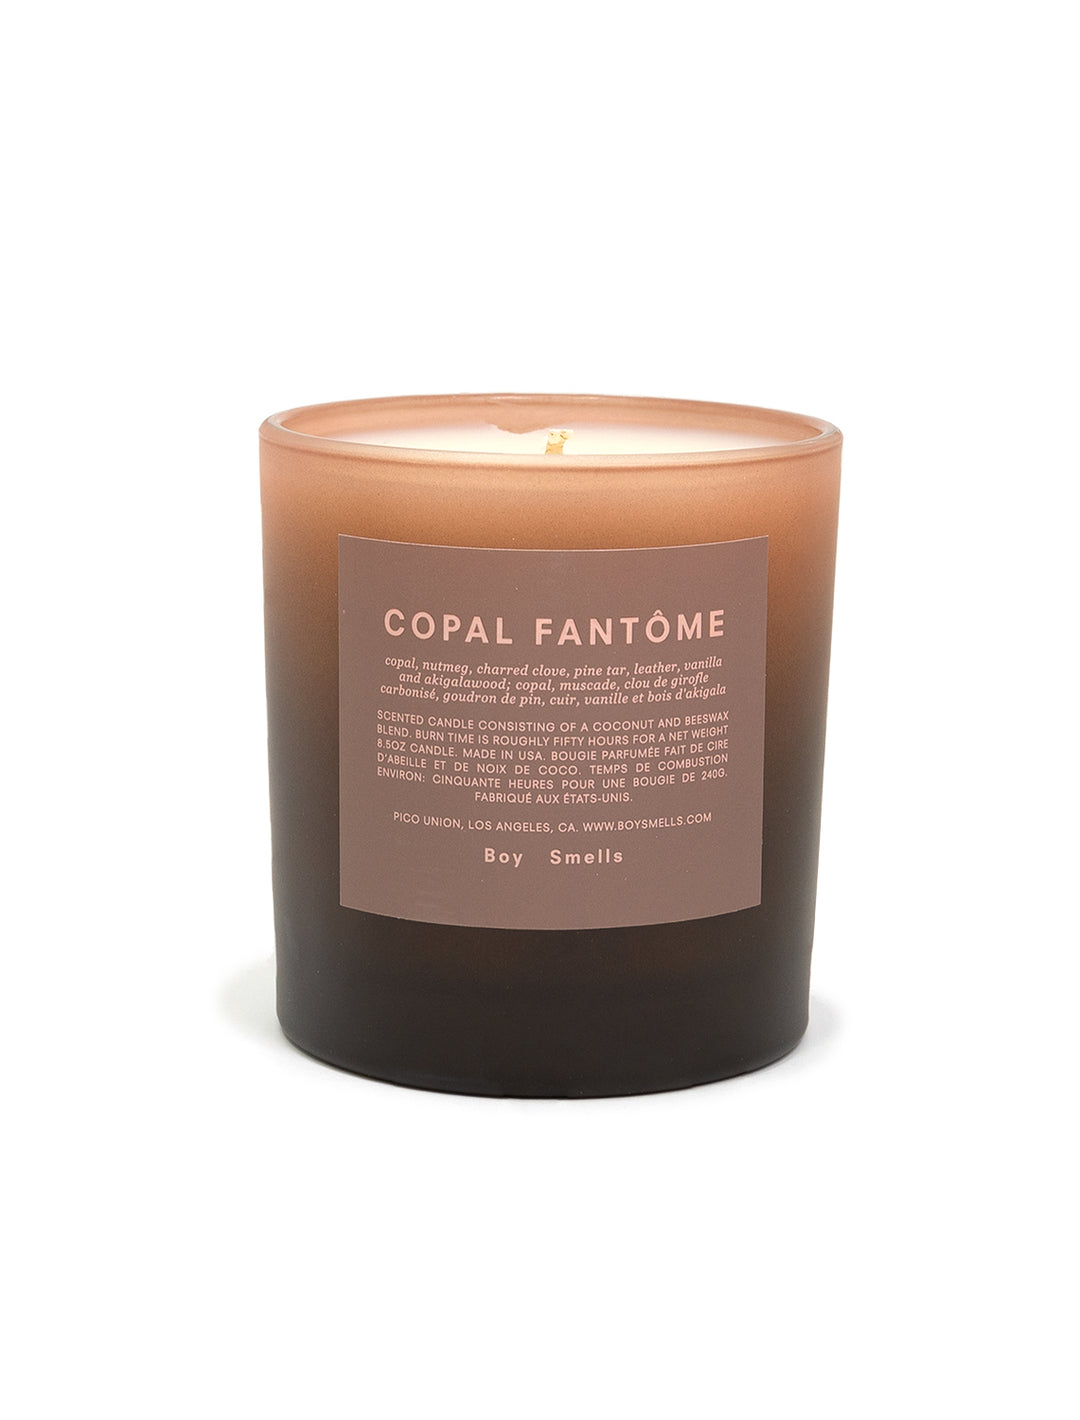 Front view of Boy Smells' copal fantome candle.